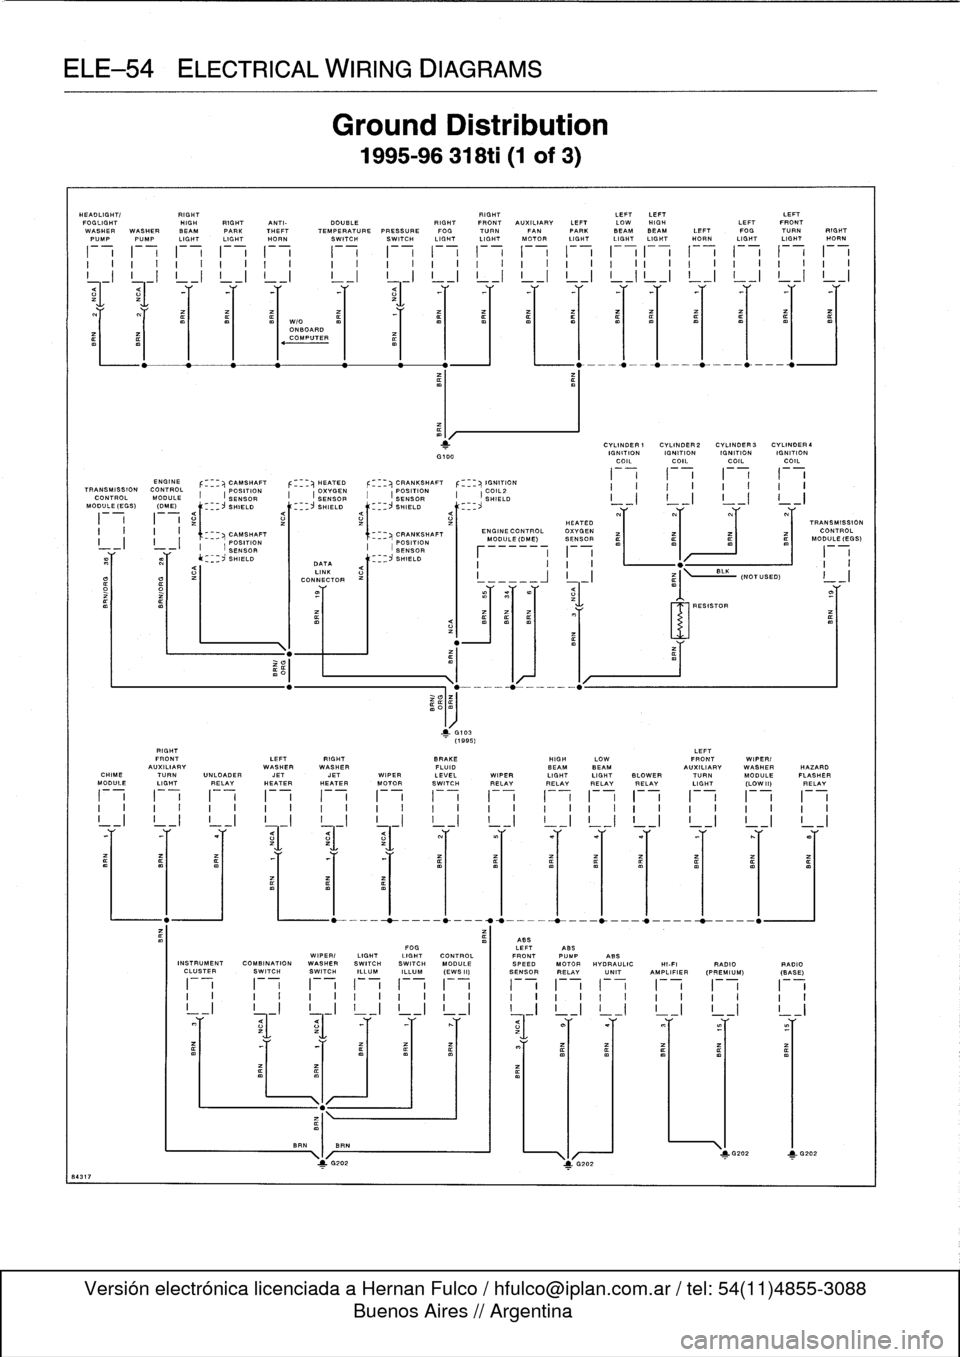 BMW 323i 1995 E36 Service Manual 
ELE-54
ELECTRICAL
WIRING
DIAGRAMS

HEADLIGHT/

	

RIGHT

	

RIGHT

	

LEFTLEFT

	

LEFT
FOGLIGHT

	

HIGH
RIGHT
ANTI-

	

DOUBLE

	

RIGHT
FRONT
AUXILIARY
LEFT
LOW
HIGH

	

LEFT
FRONT
WASHER
WASHER
B